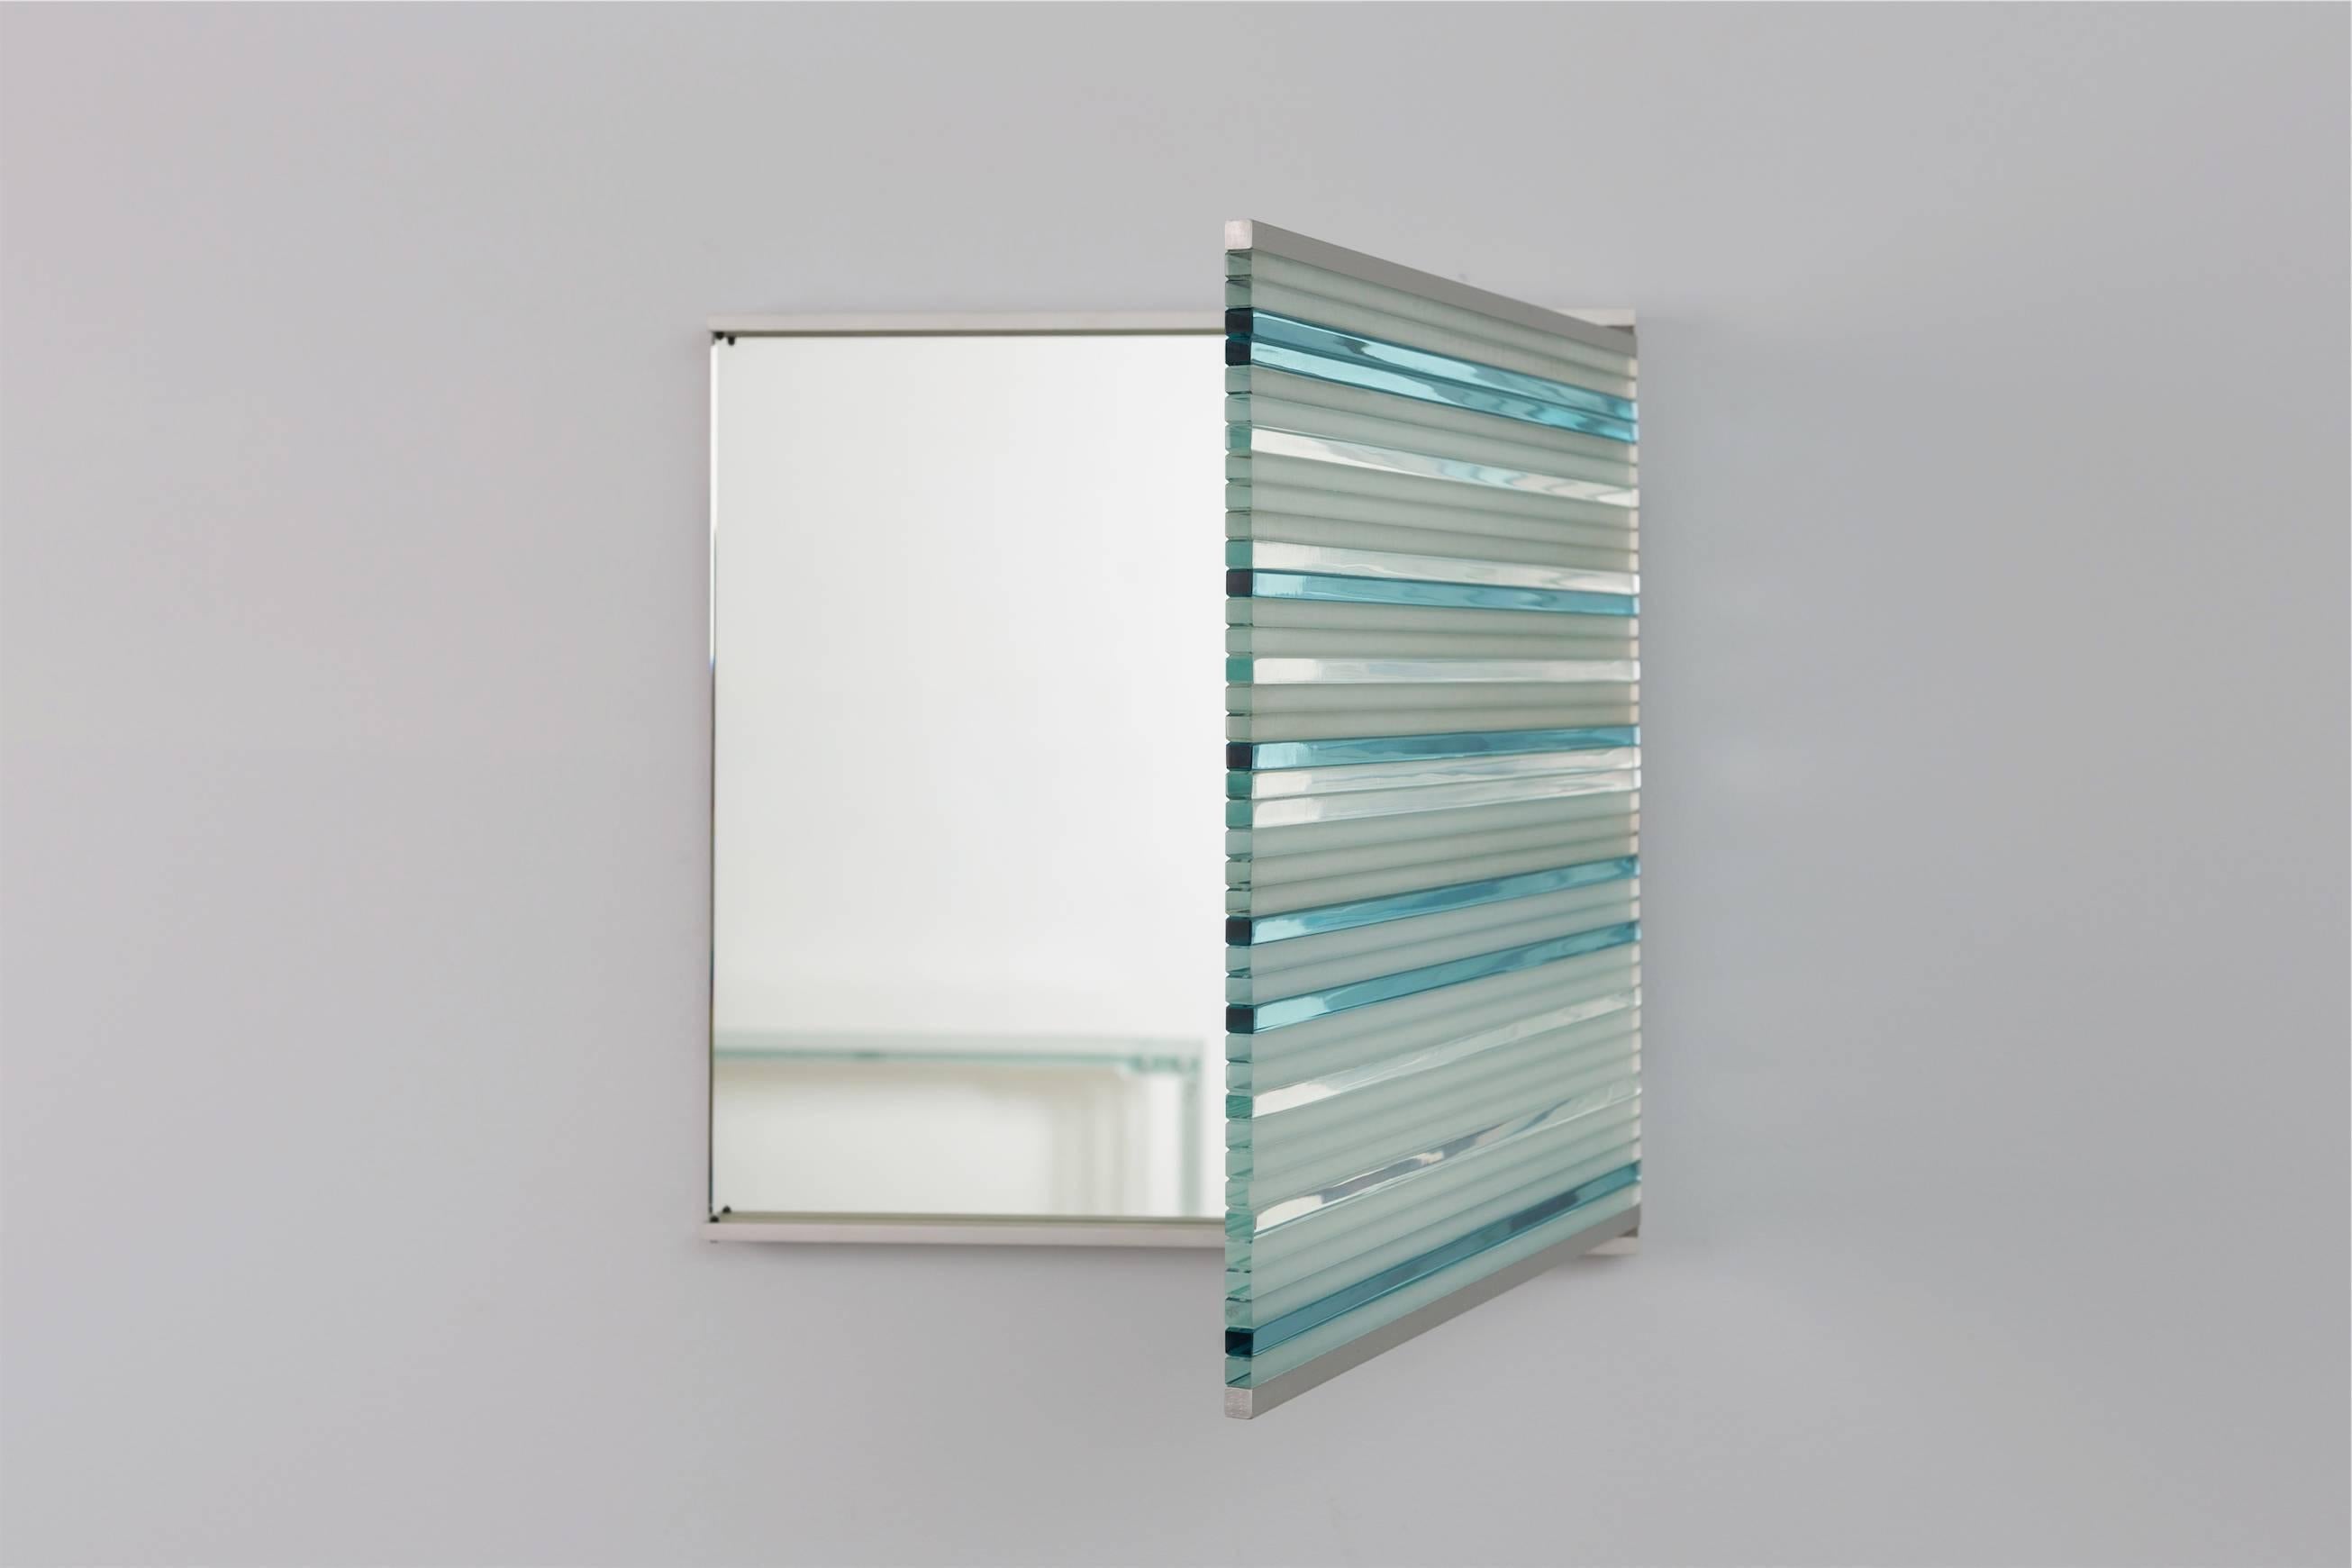 Mirror made of strips of tempered glass by French designer Thomas Lemut.